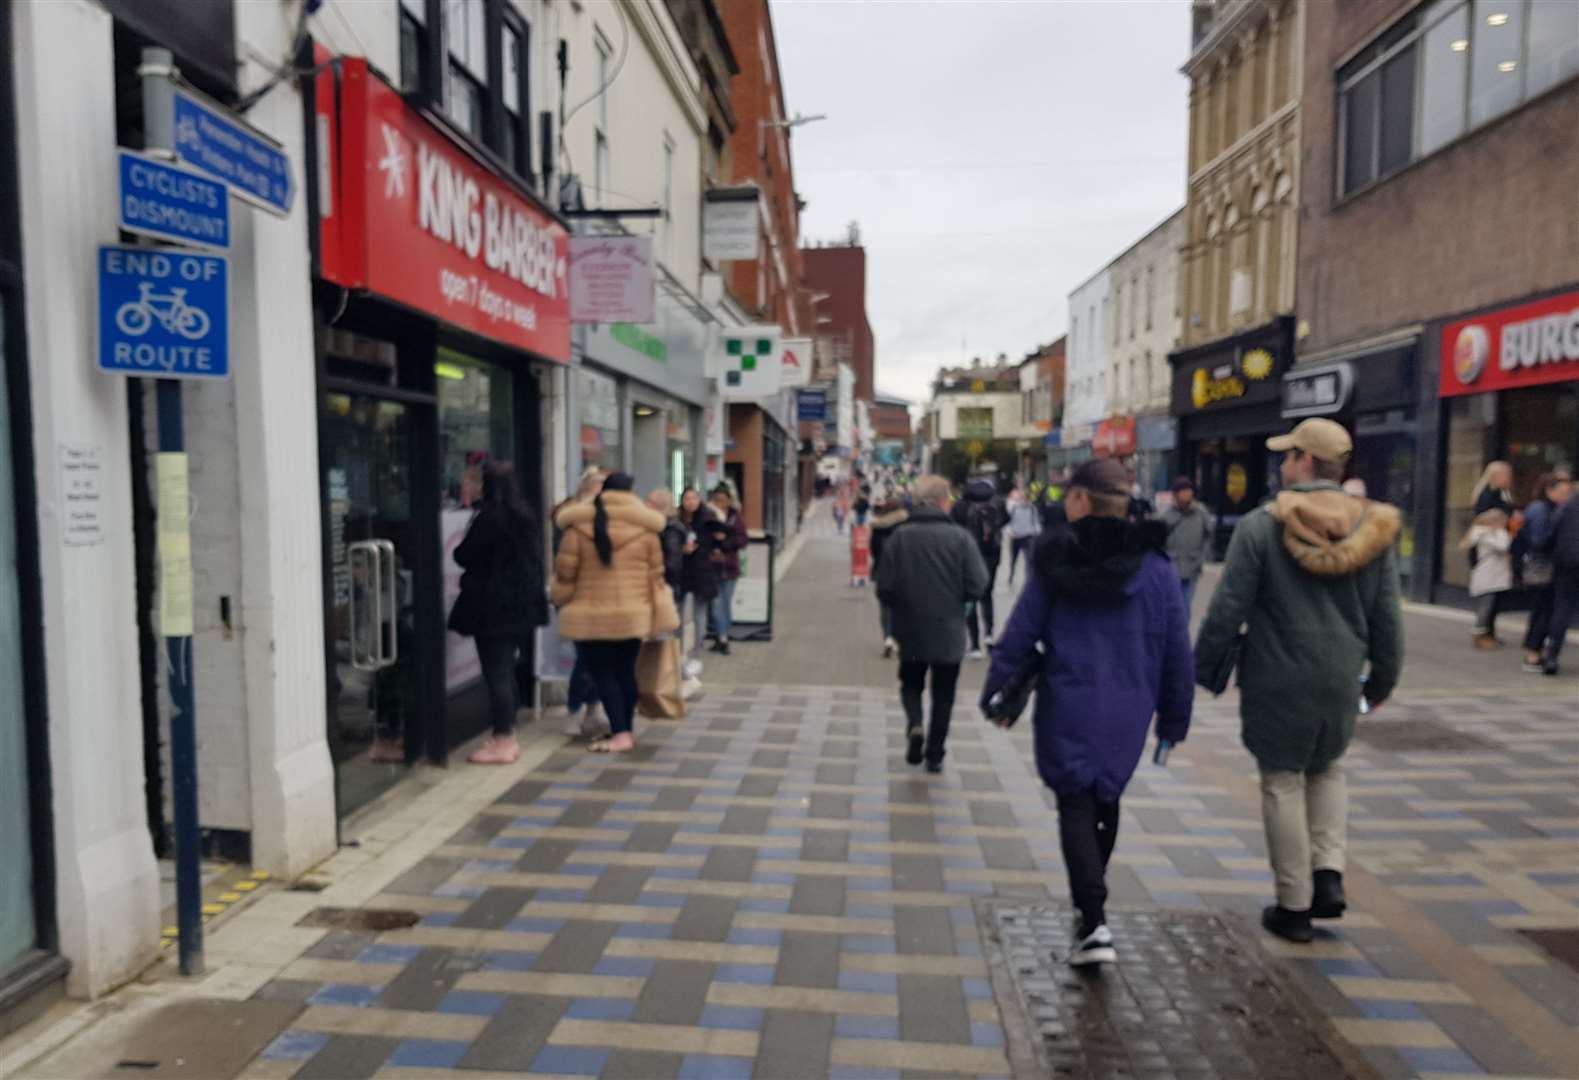 Shoppers in Maidstone on the day shops reopened after lockdown